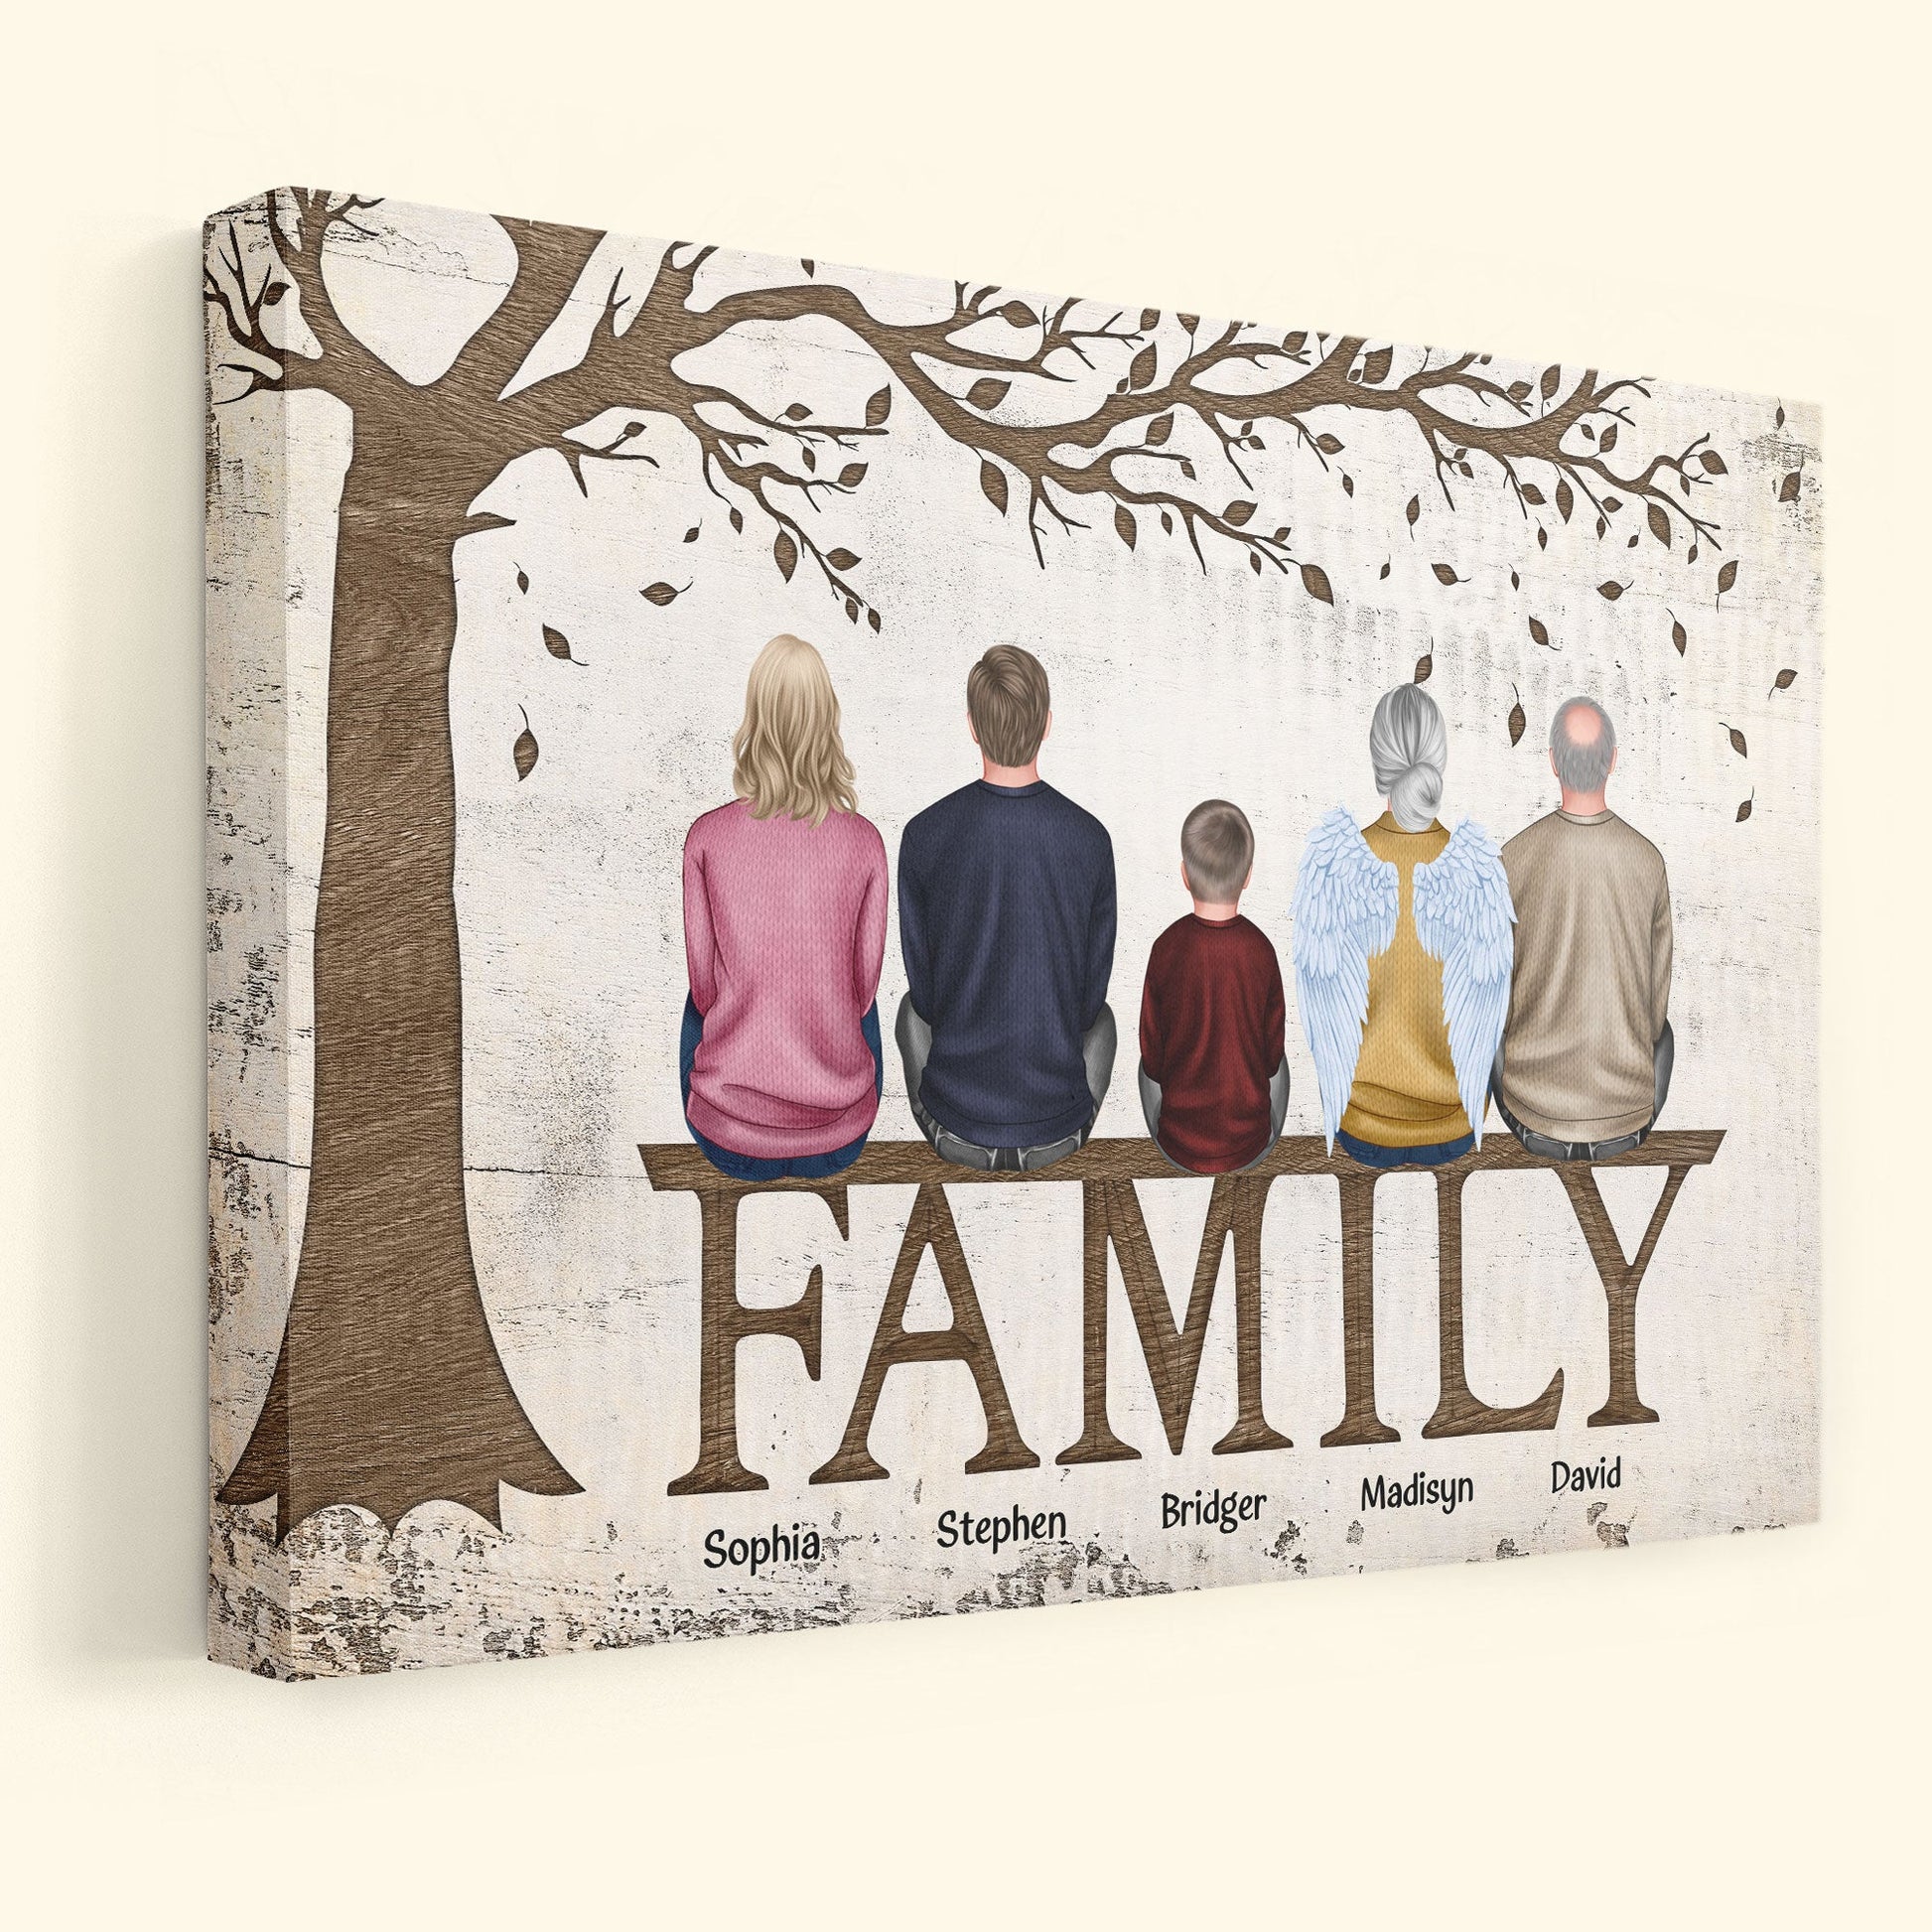 No Returns Or Refunds - Personalized Photo Poster/Wrapped Canvas – Macorner